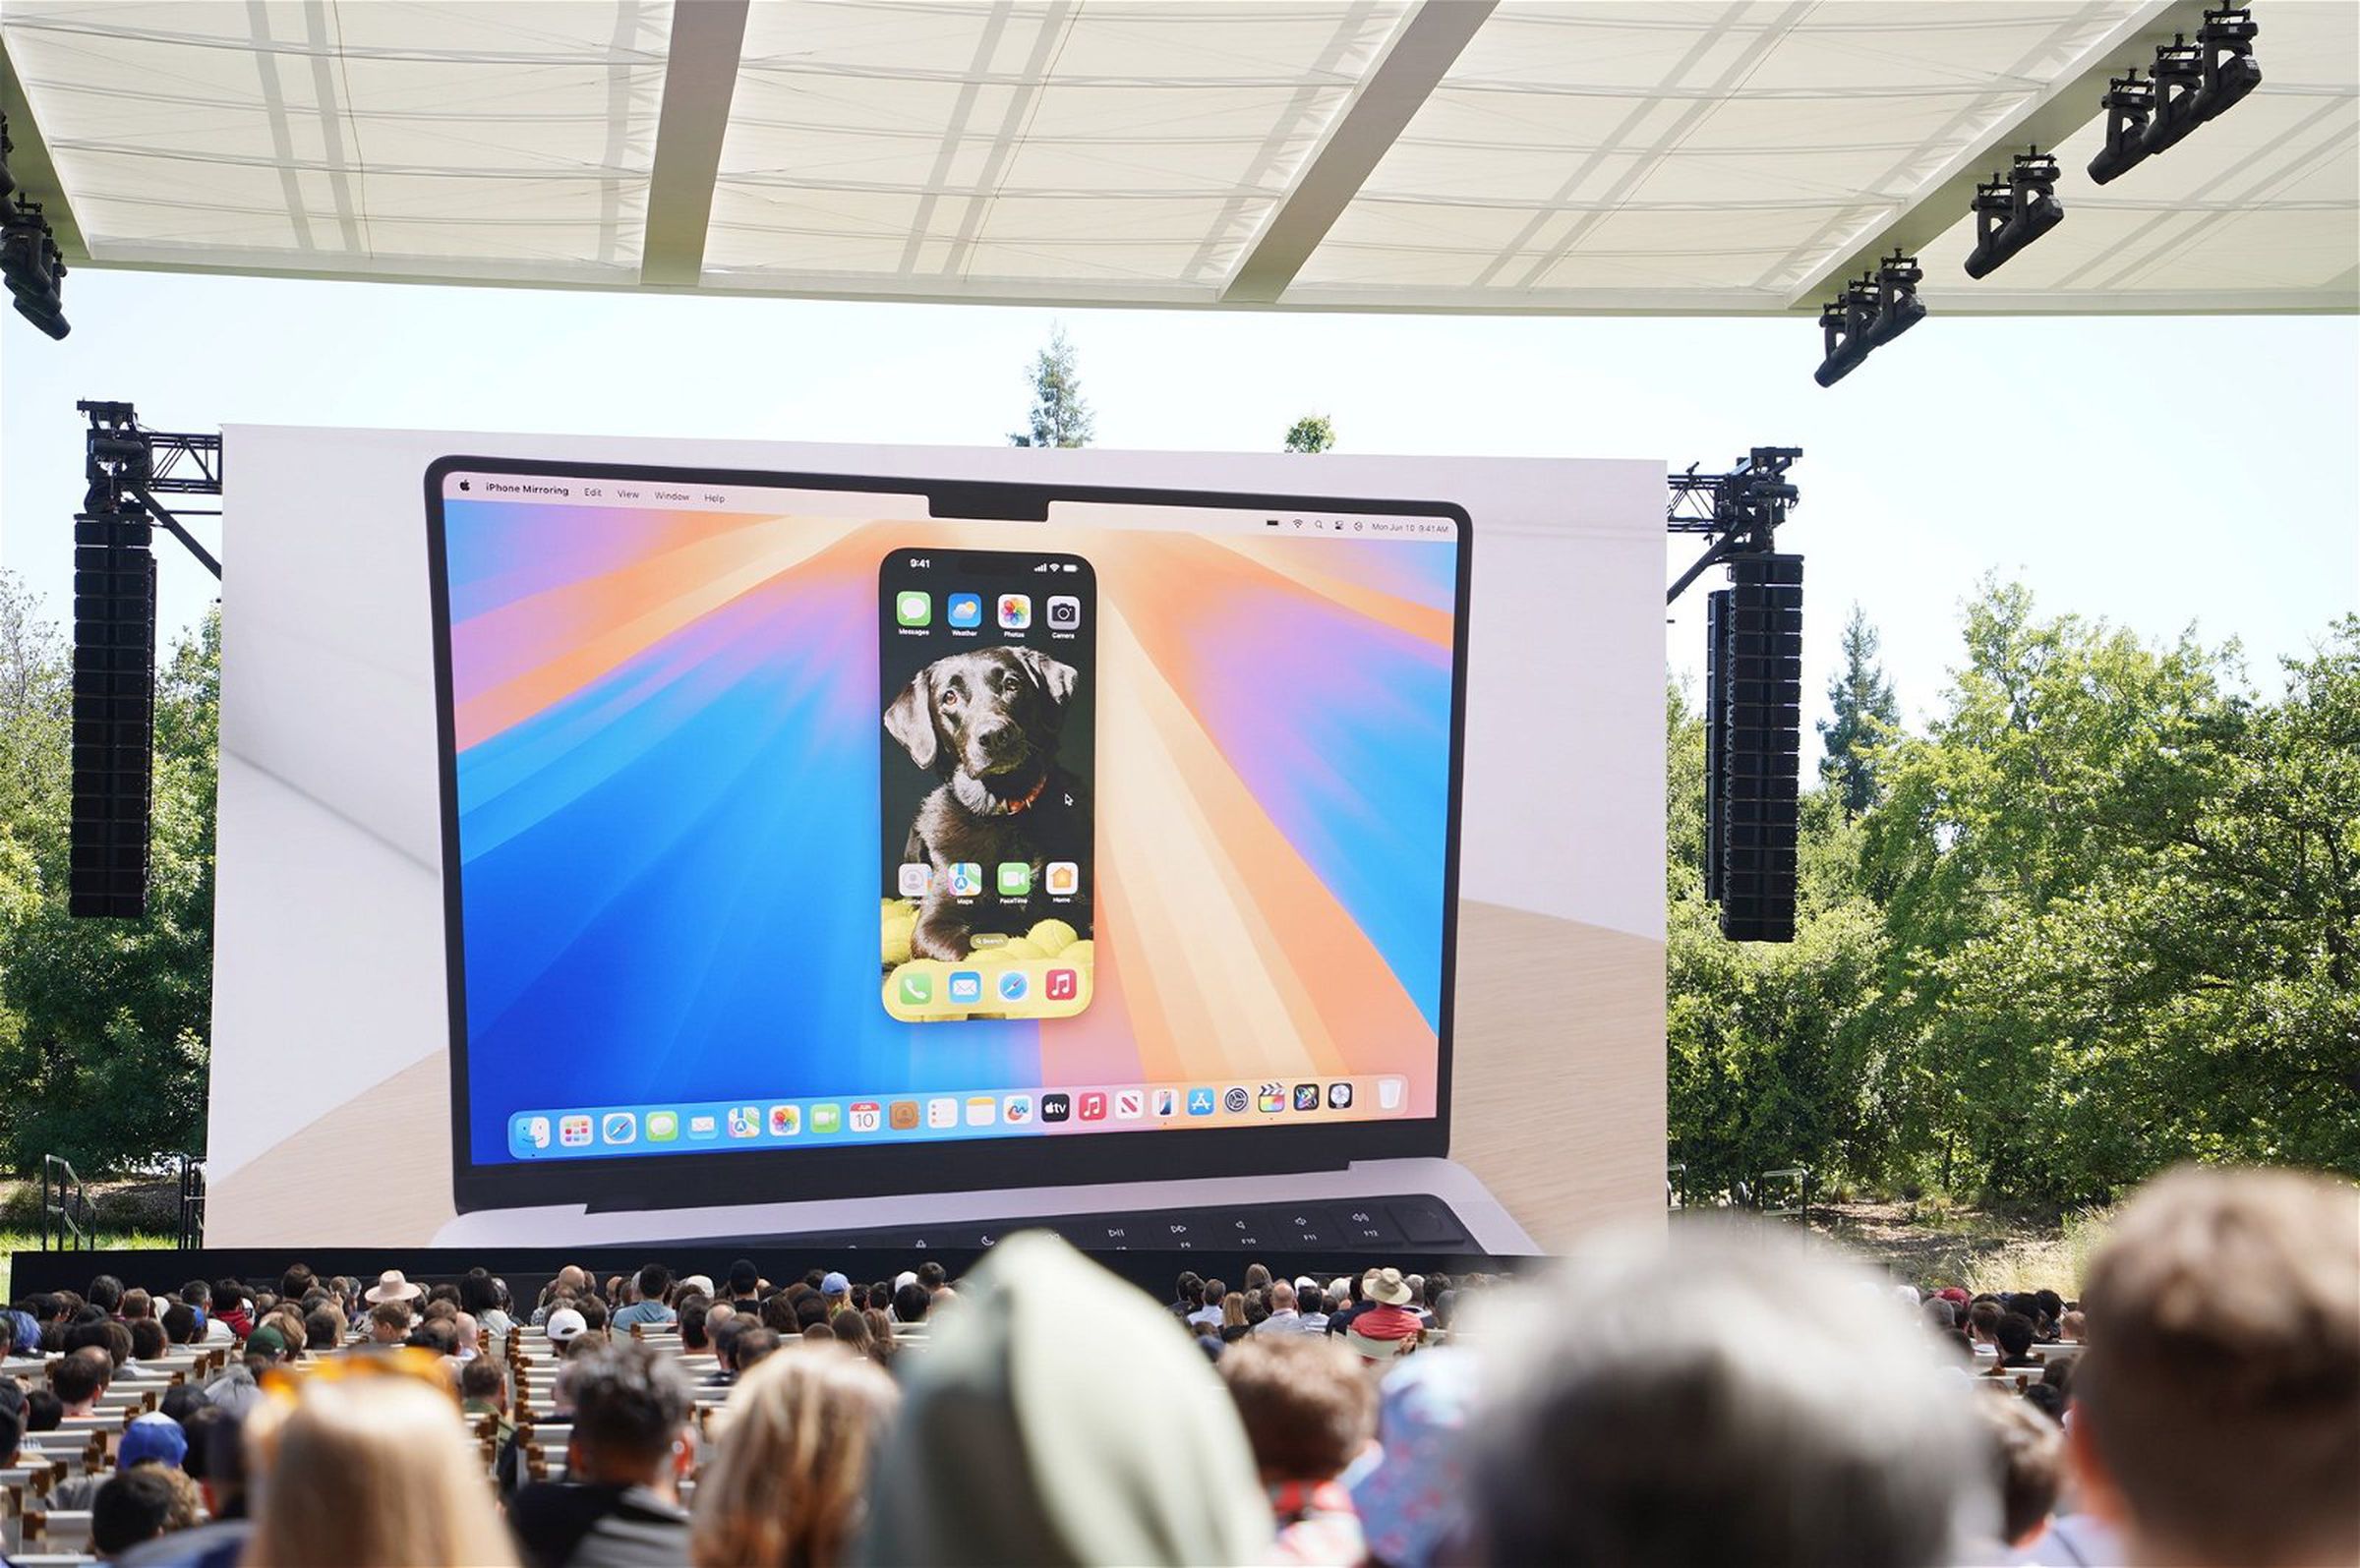 Image of iPhone mirroring from WWDC